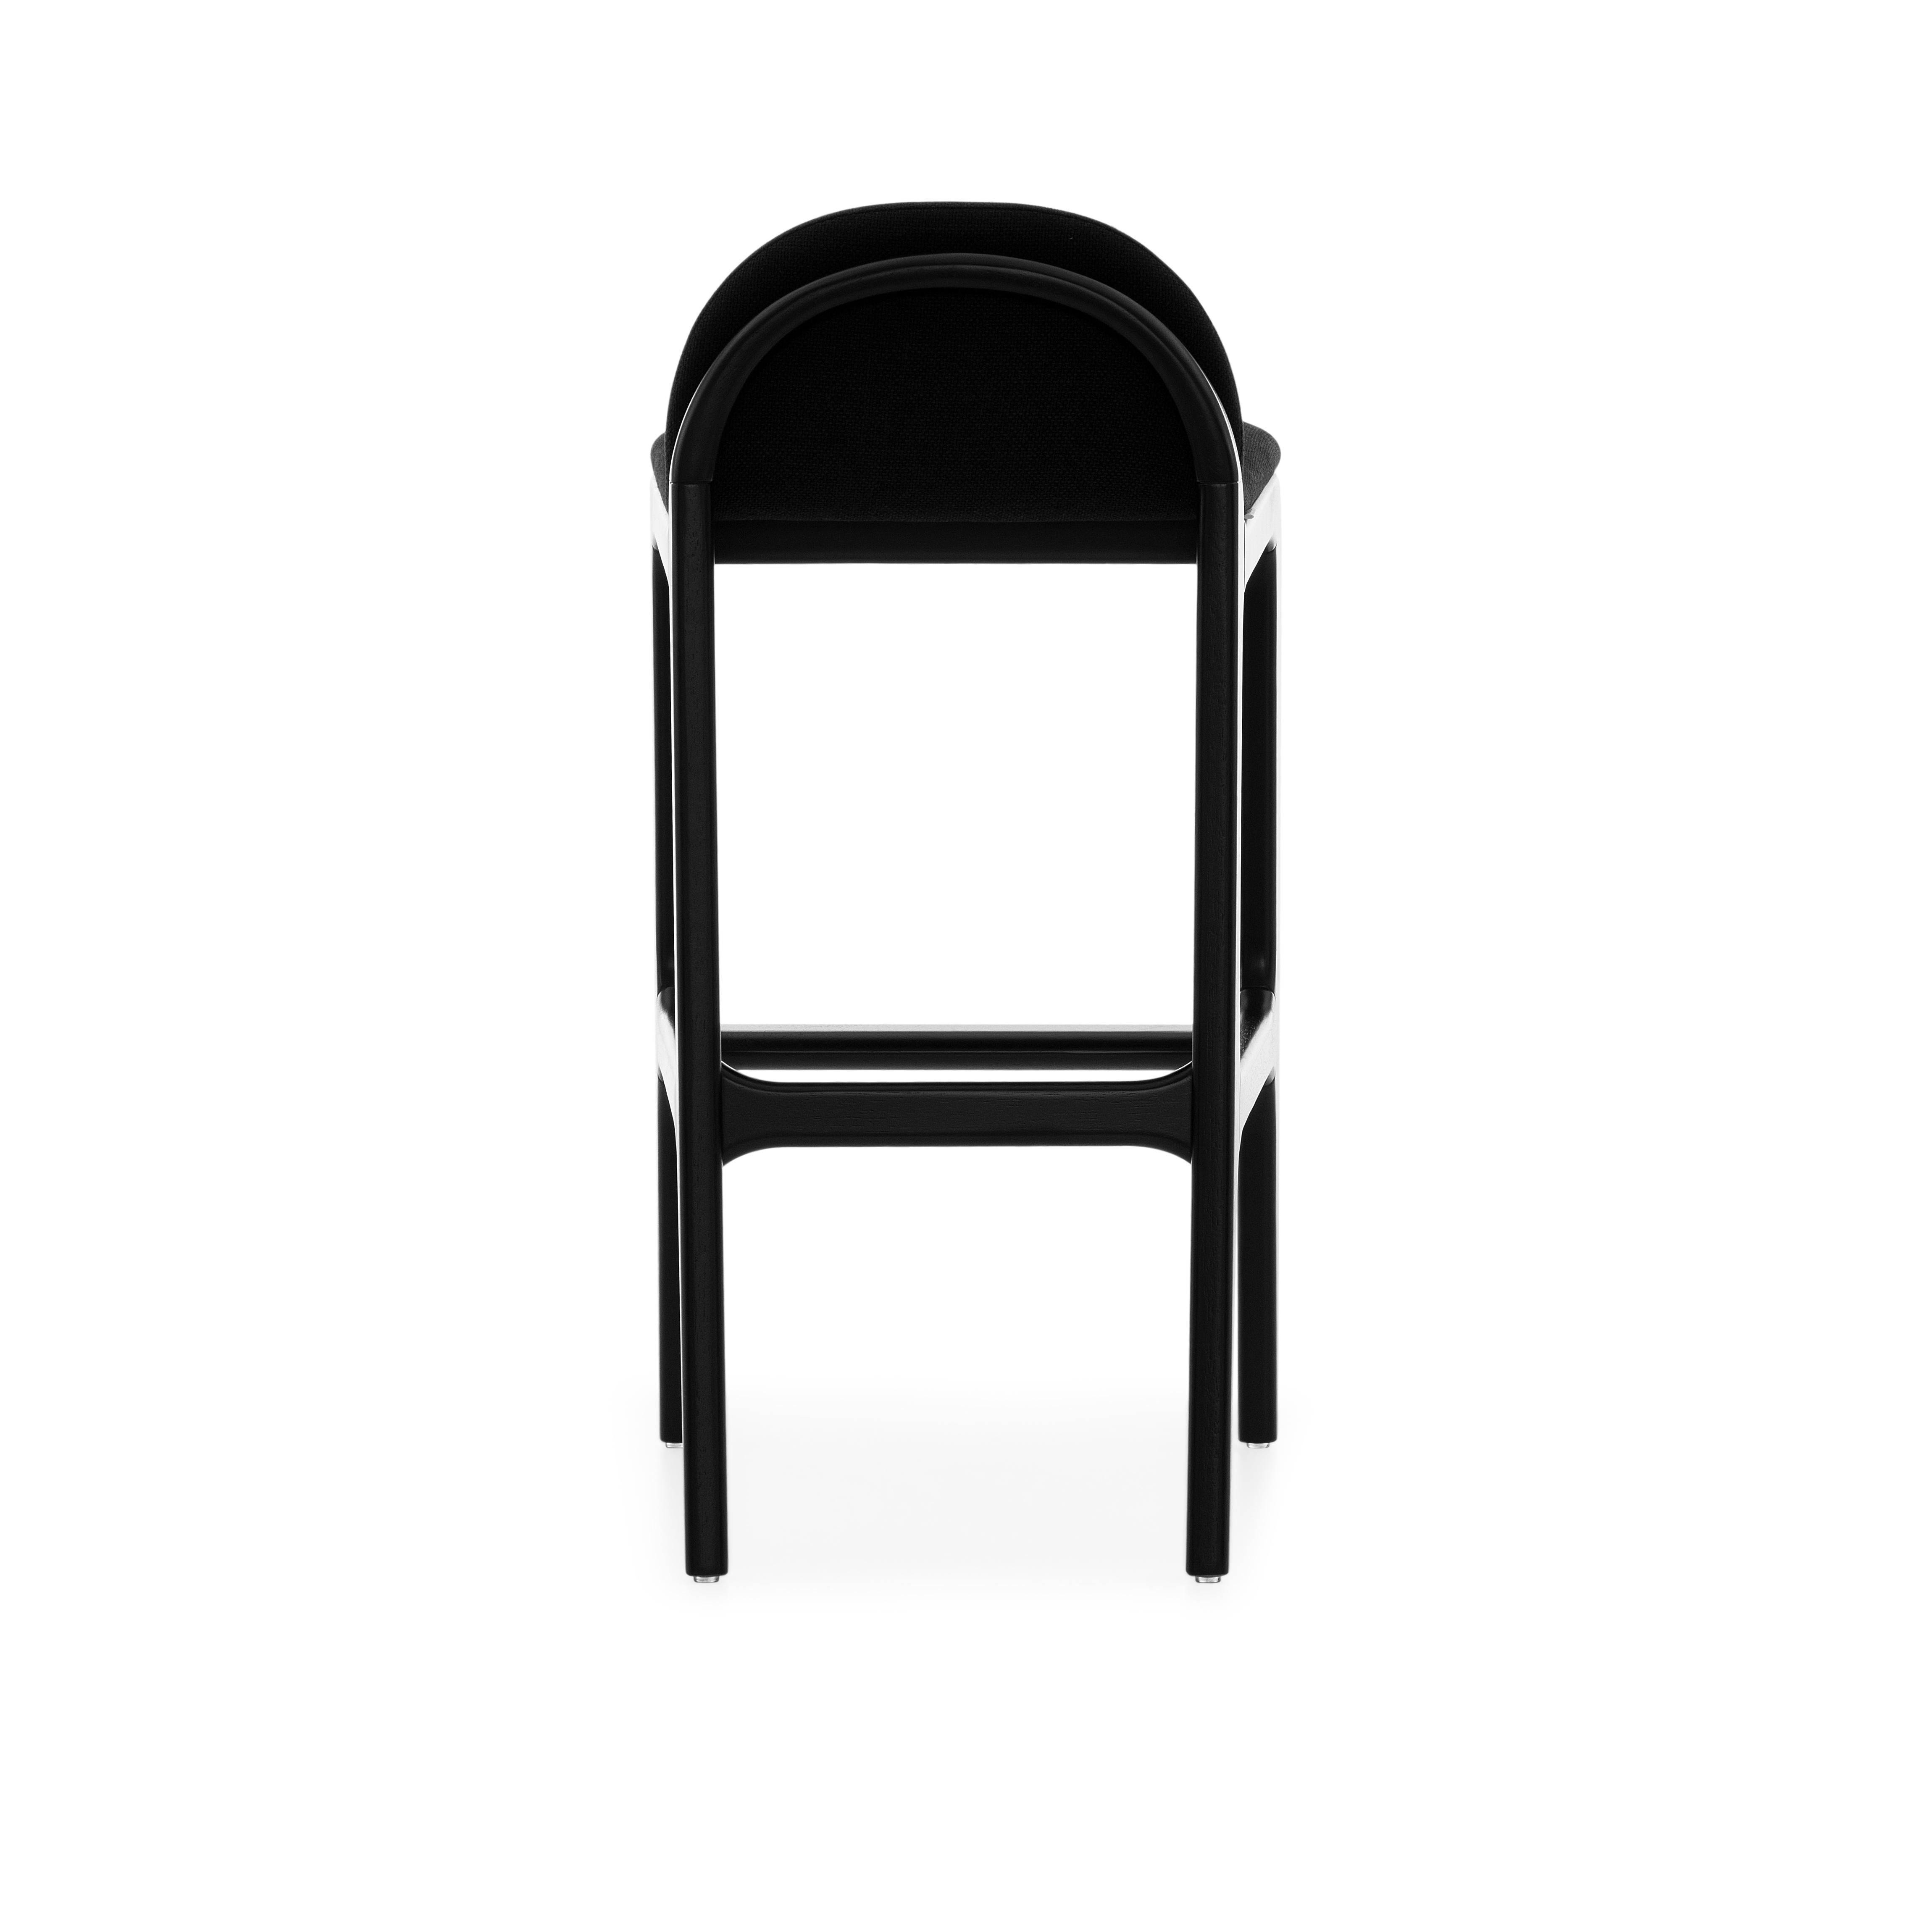 Brazilian Ura Counter Stool in Black Wood Finish Base and Upholstered Black Seat For Sale